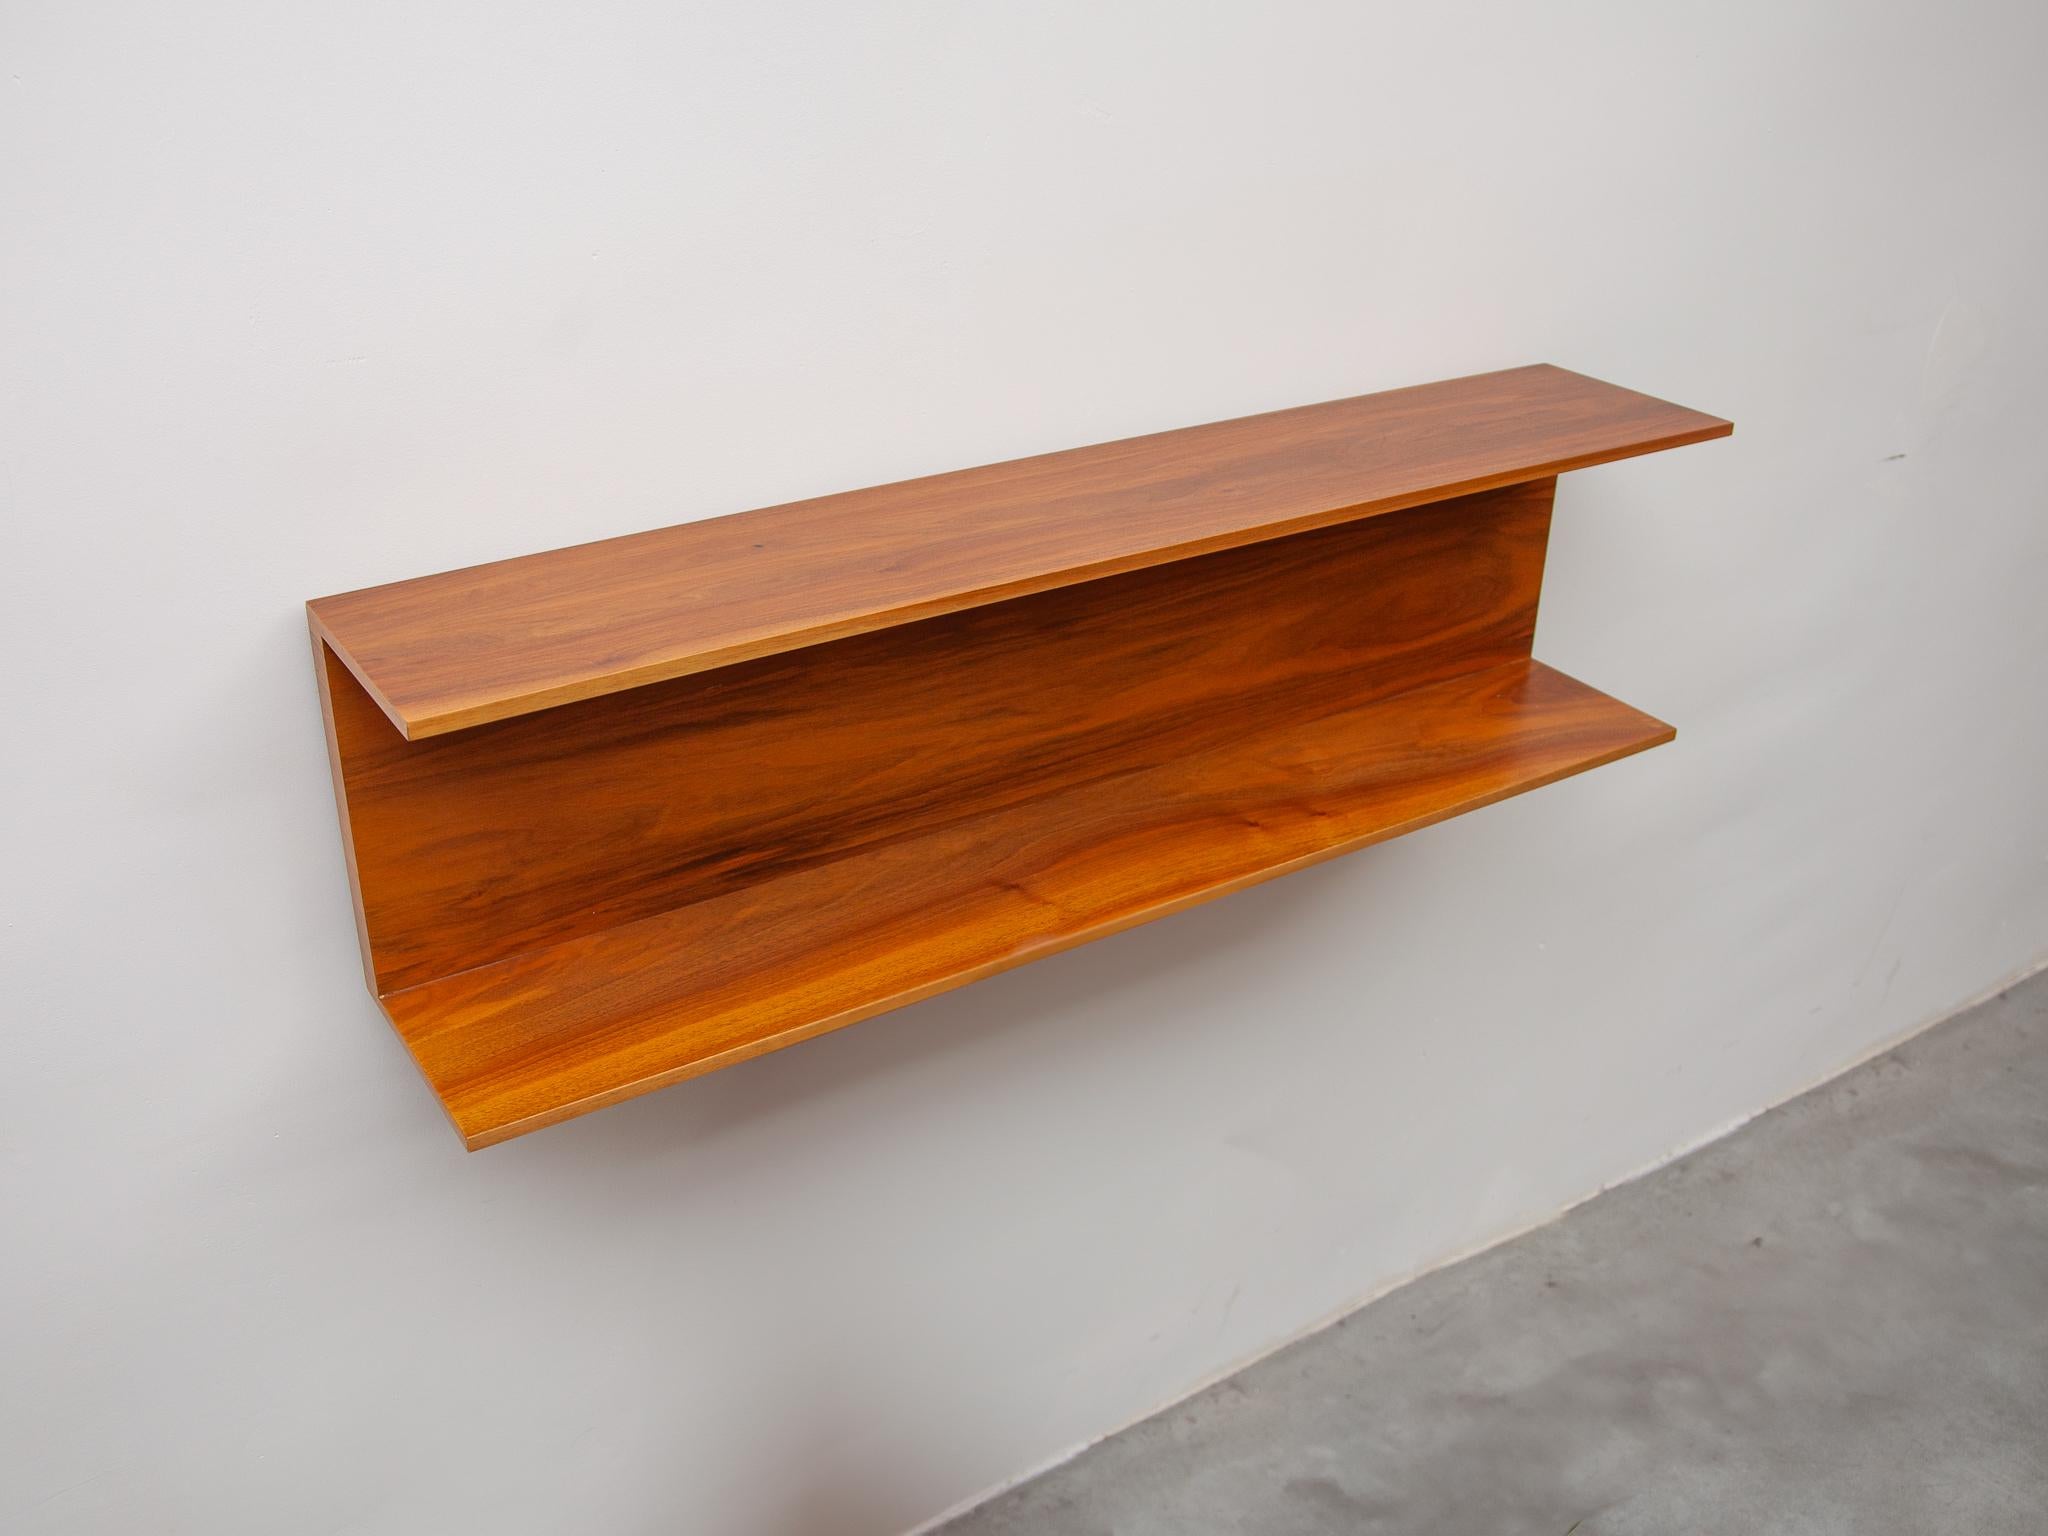 Hand-Crafted Floating Wall Shelve designed by Walter Wirtz for Wilhelm Renz, Germany, 1960s